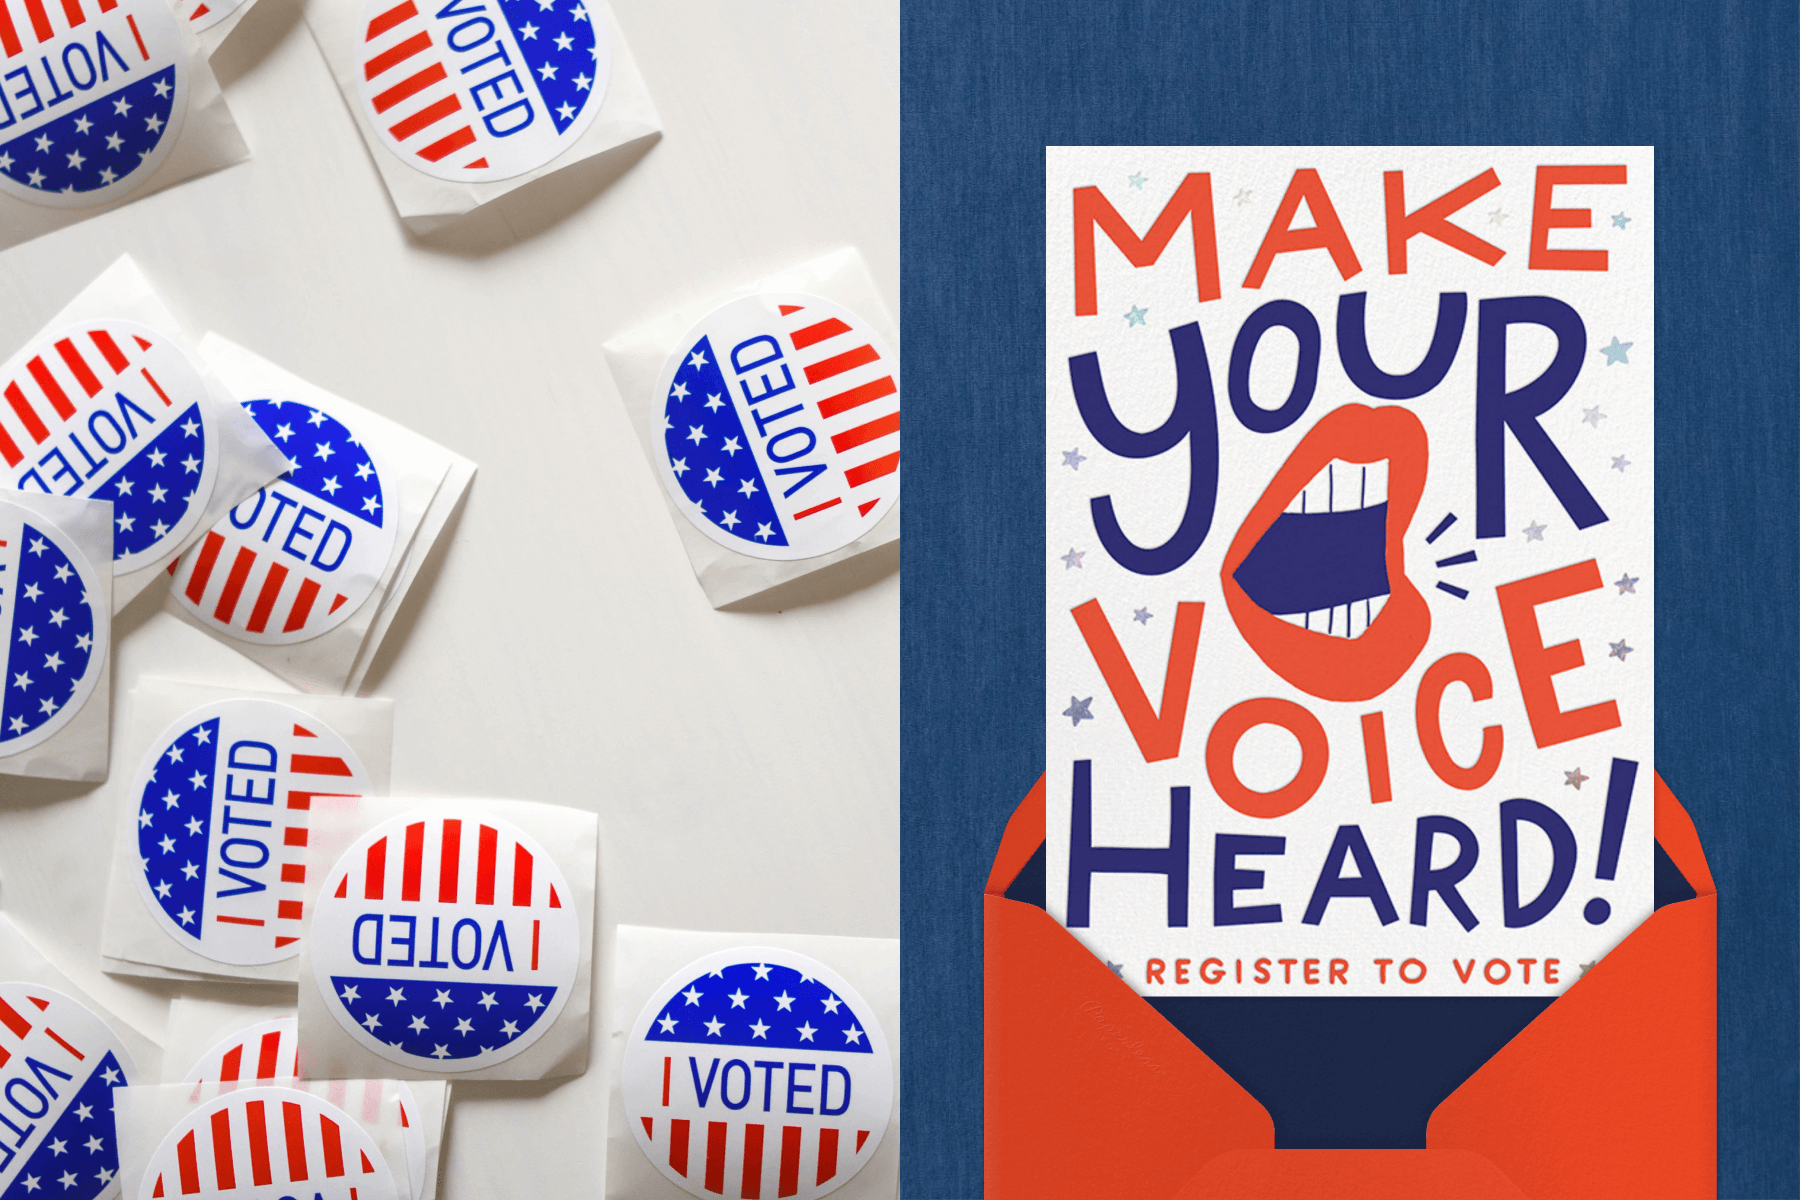 Left: “I Voted” stickers on a white surface. Right: A red, white, and blue card reads “Make your voice heard! Register to vote” with an illustration of an open mouth.